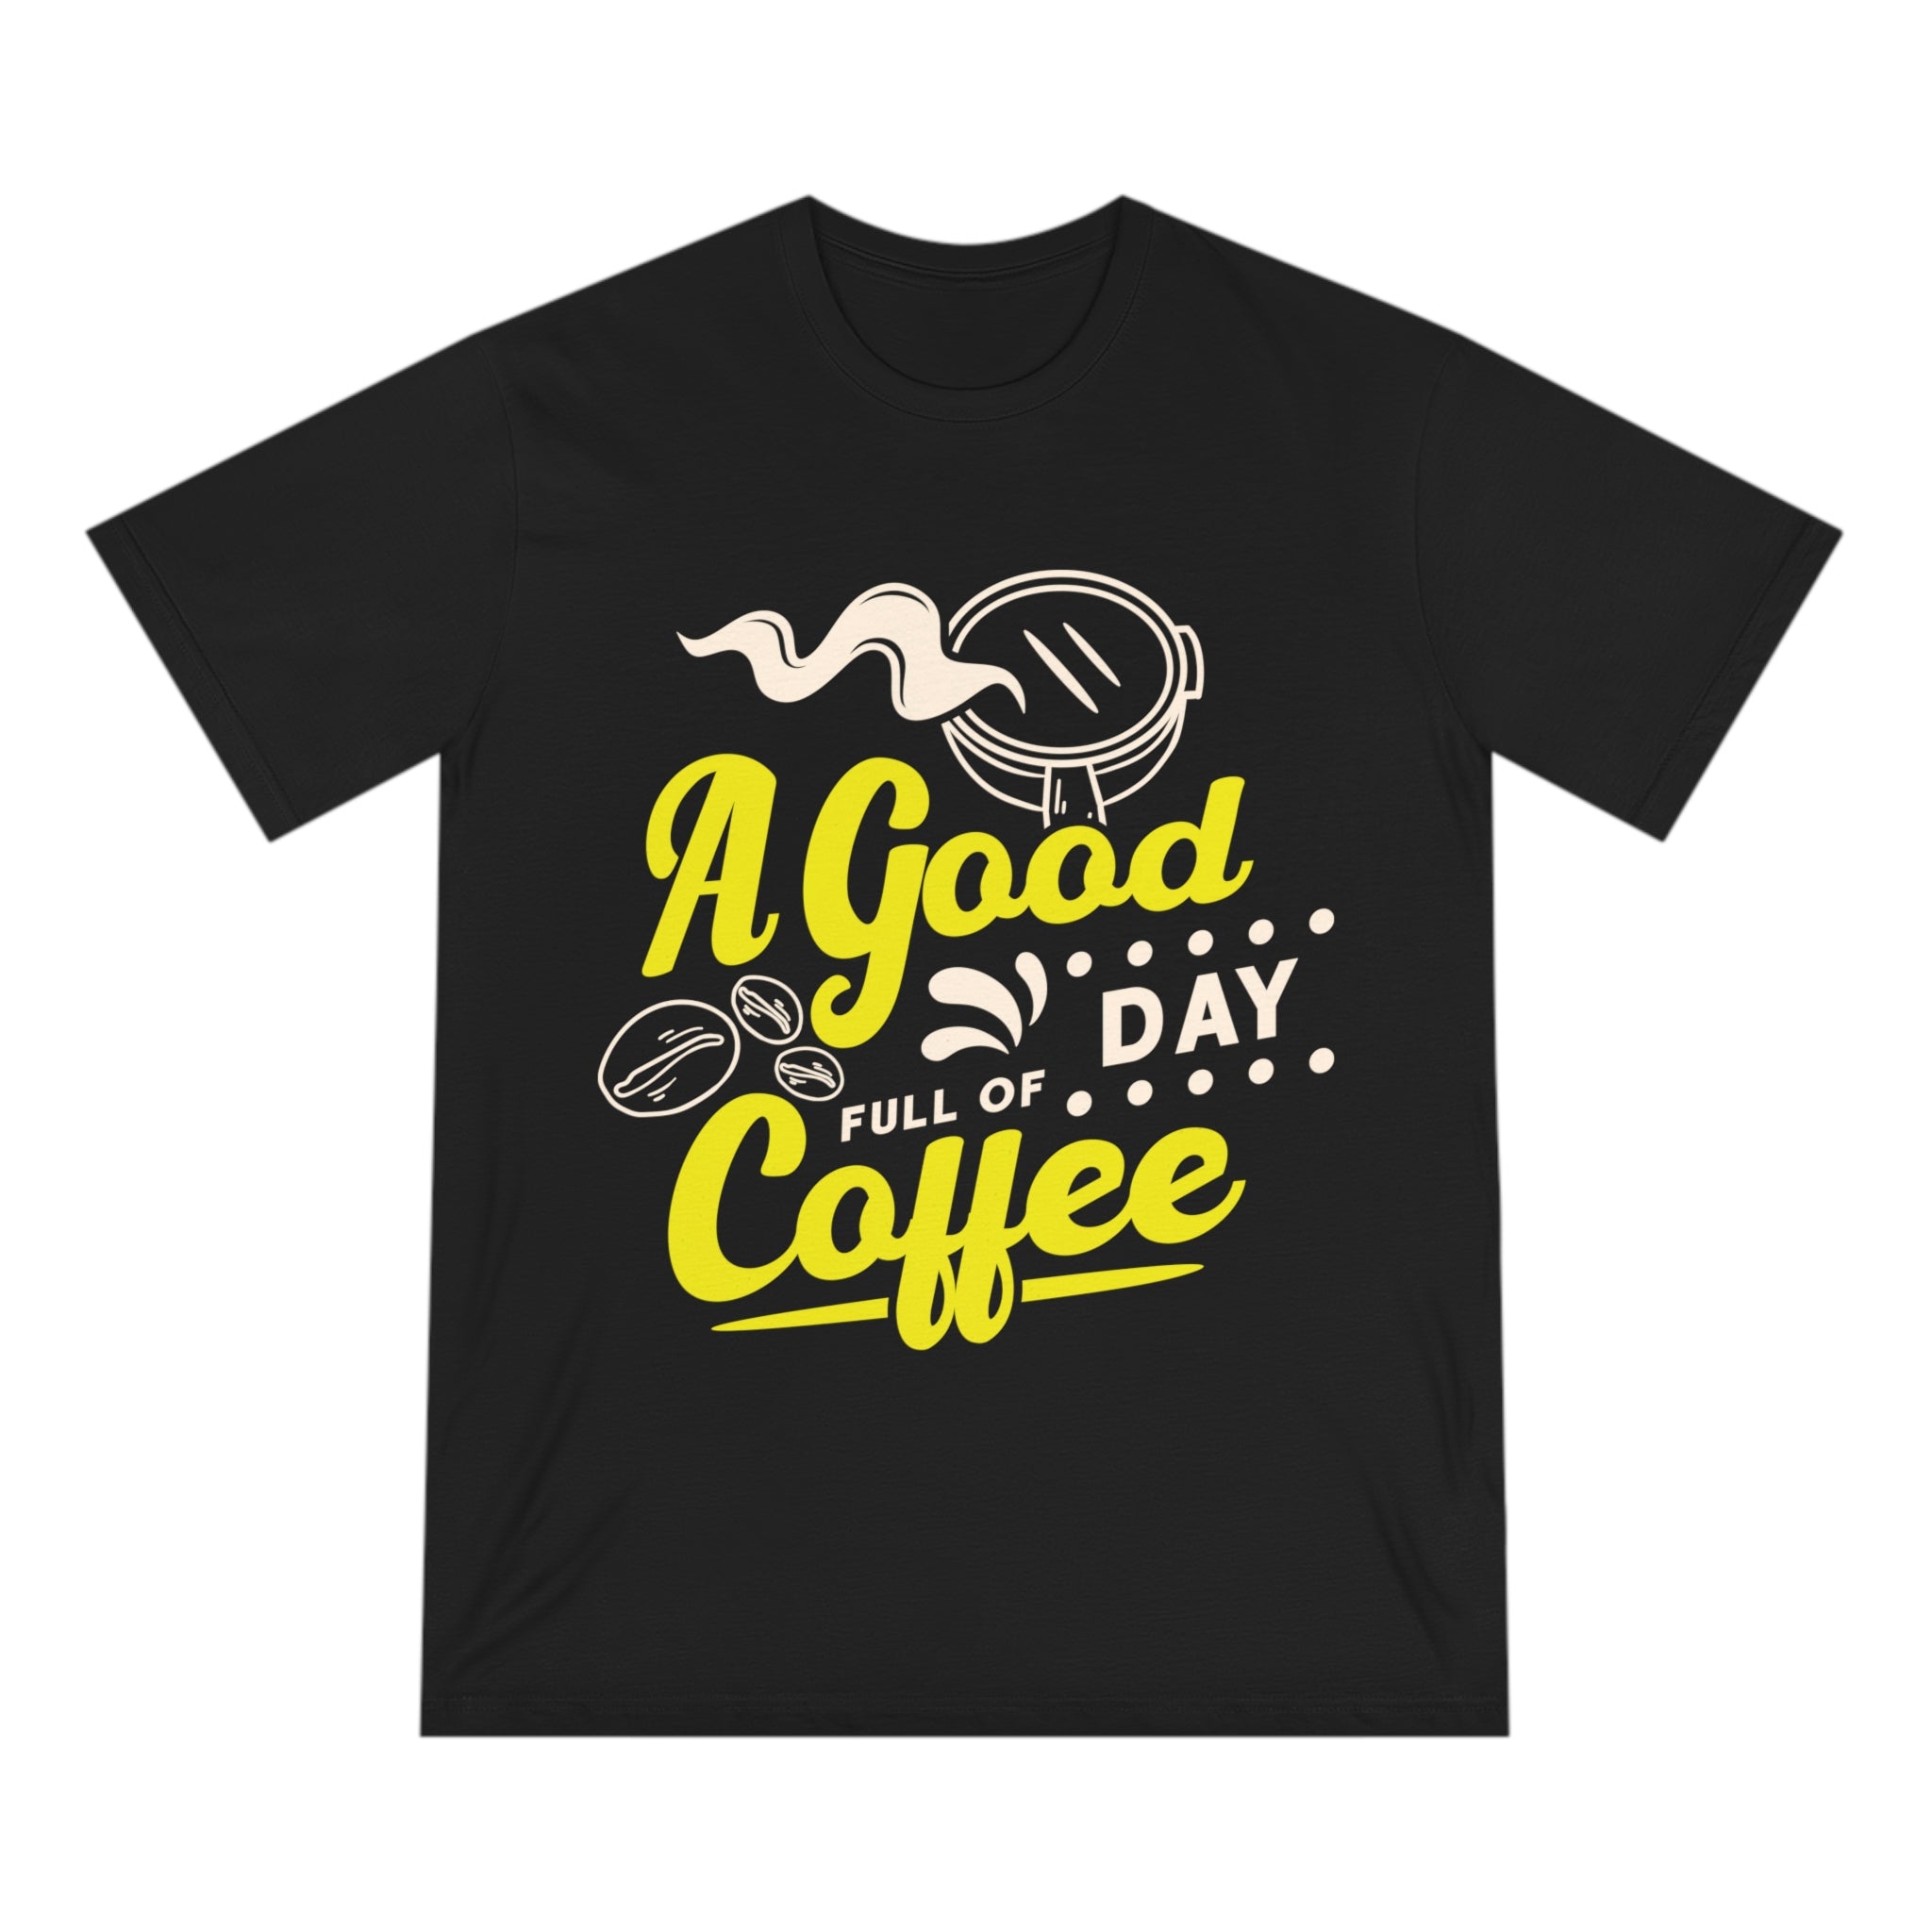 A Good Day Full of Coffee, T-shirt